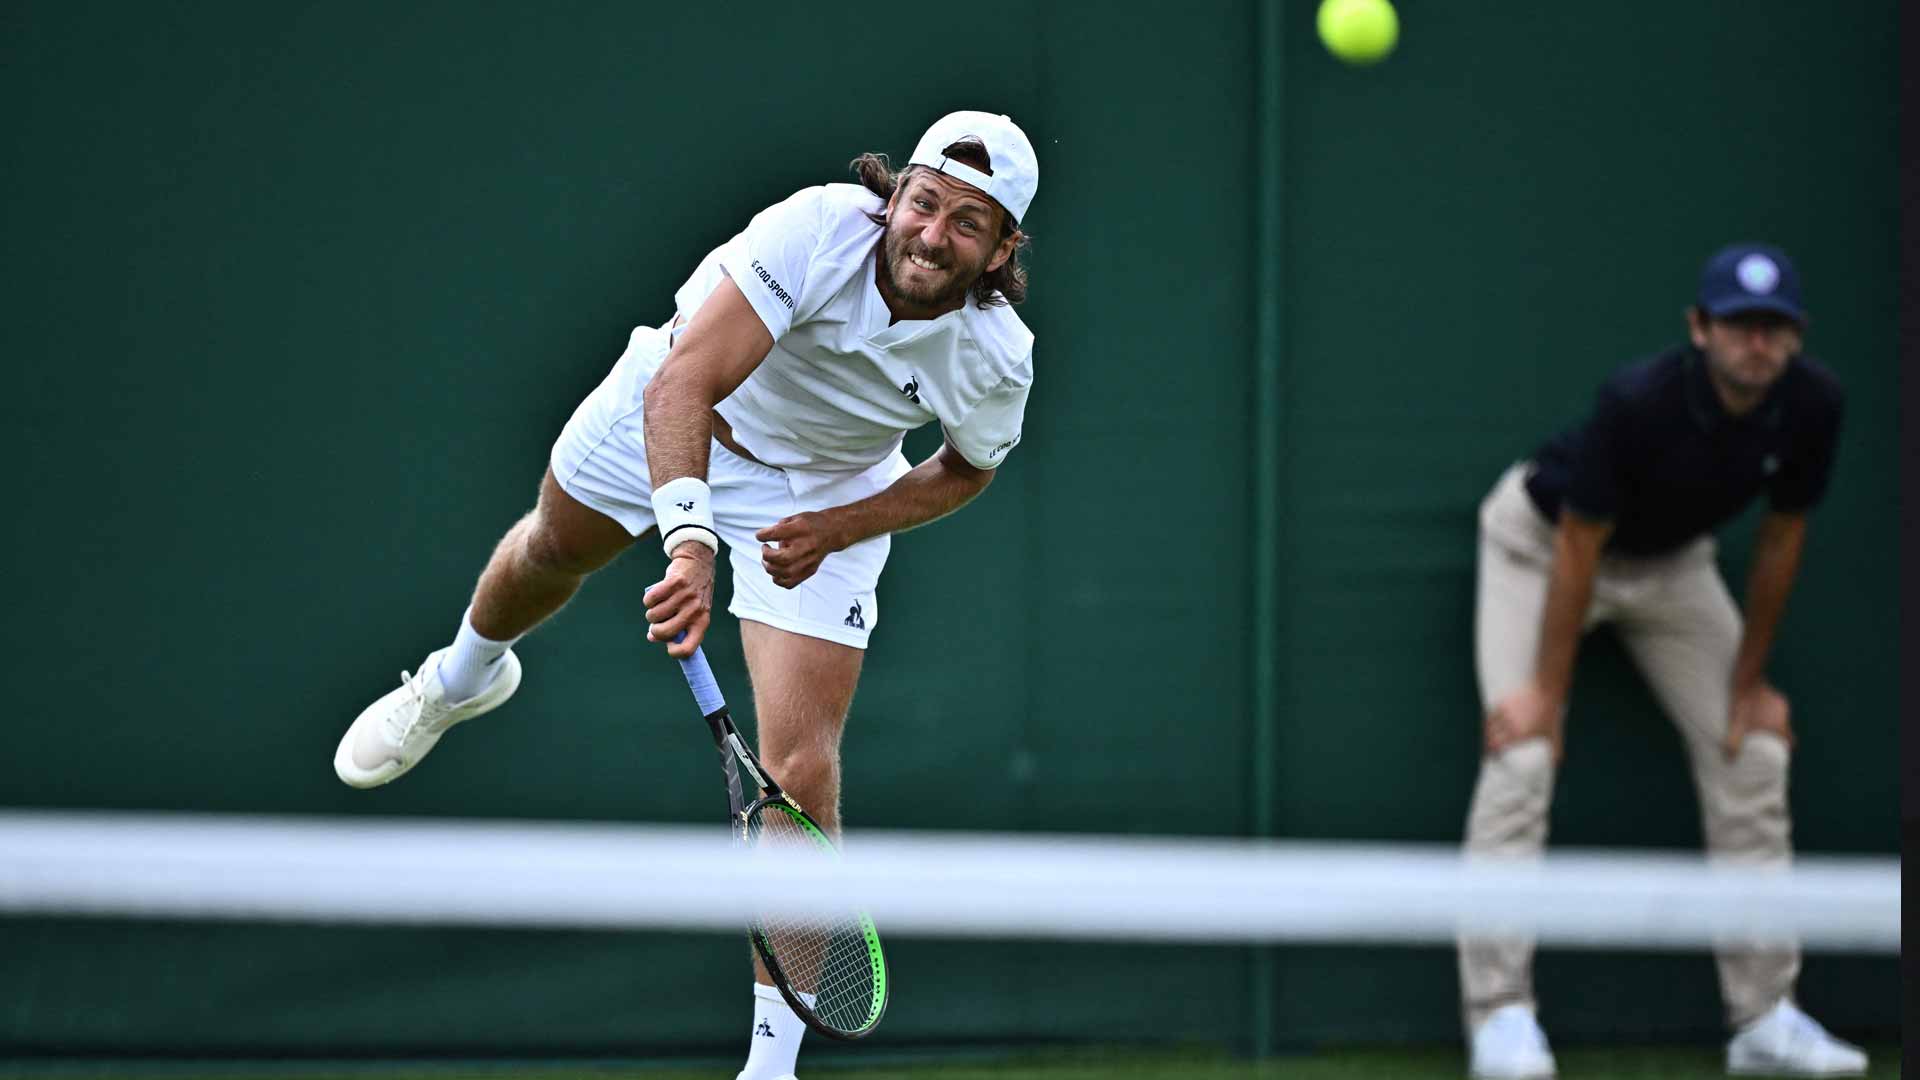 Lucas Pouille, Hyeon Chung Advance To Second Round Of Wimbledon Qualifying ATP Tour Tennis